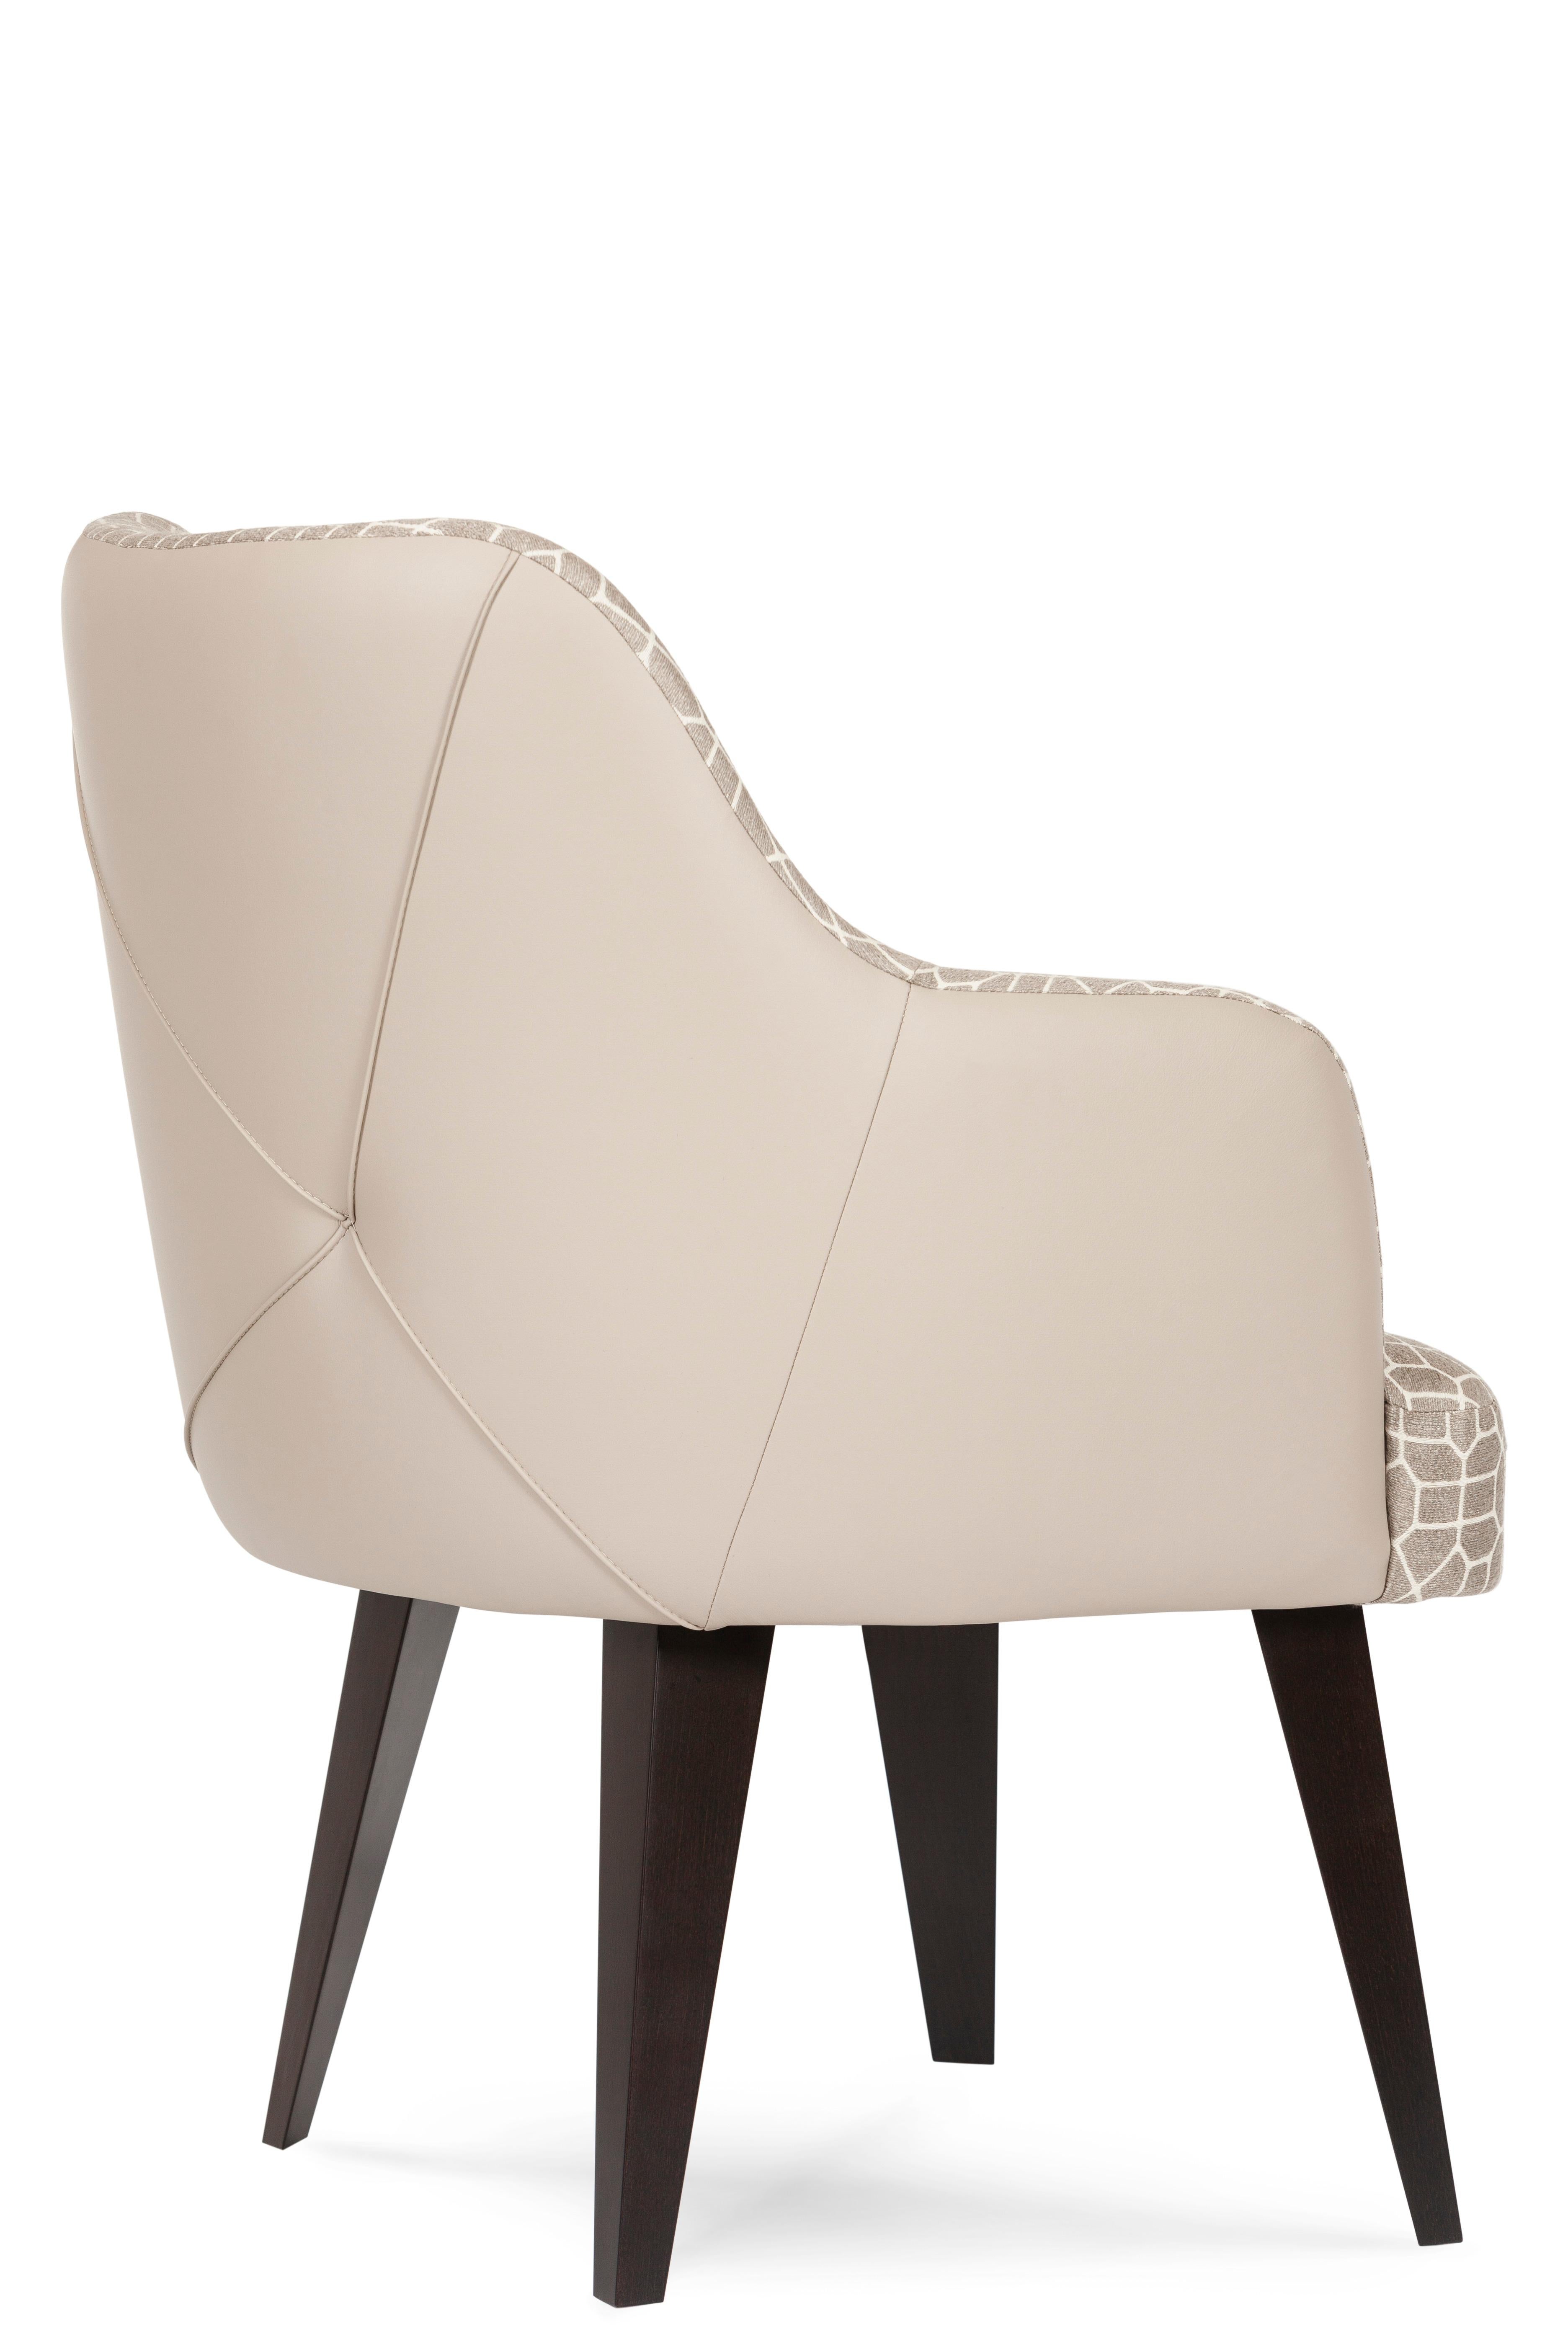 Velvet Modern Margot Dining Chairs, Leather Cotton, Handmade in Portugal by Greenapple For Sale